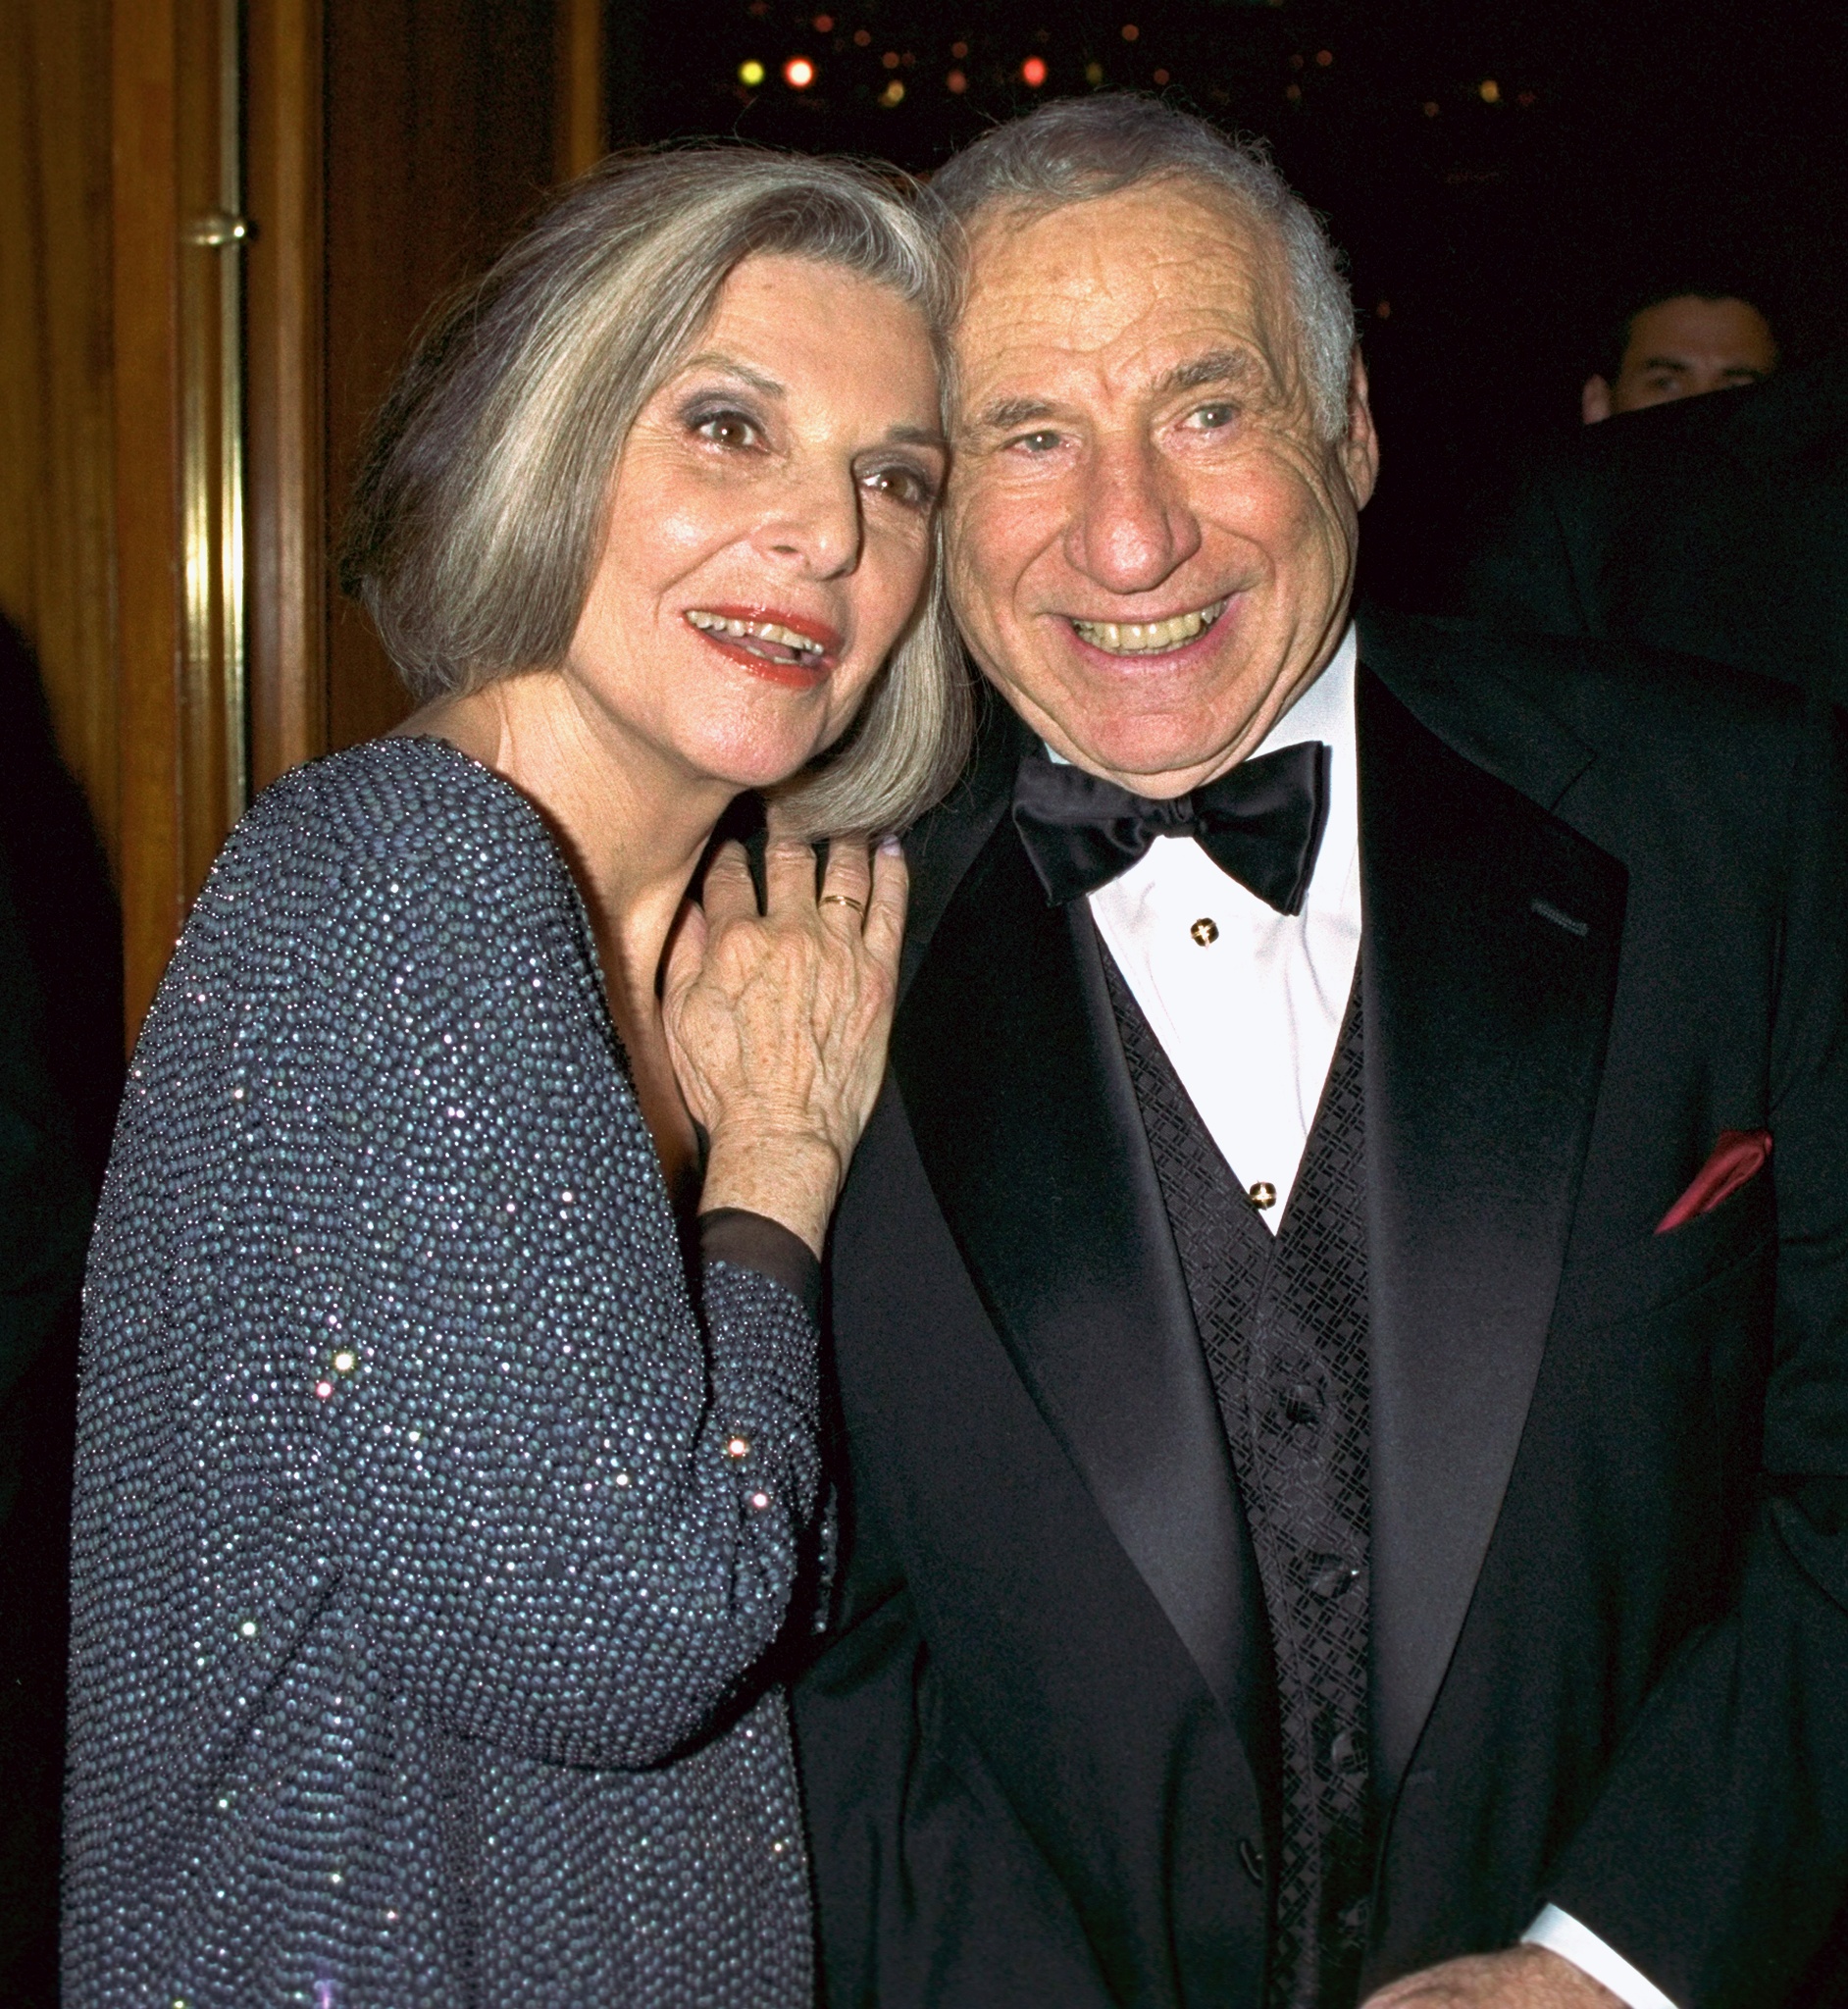  Mel Brooks and Anne Bancroft in Los Angeles in 1986 | Source: Getty Images